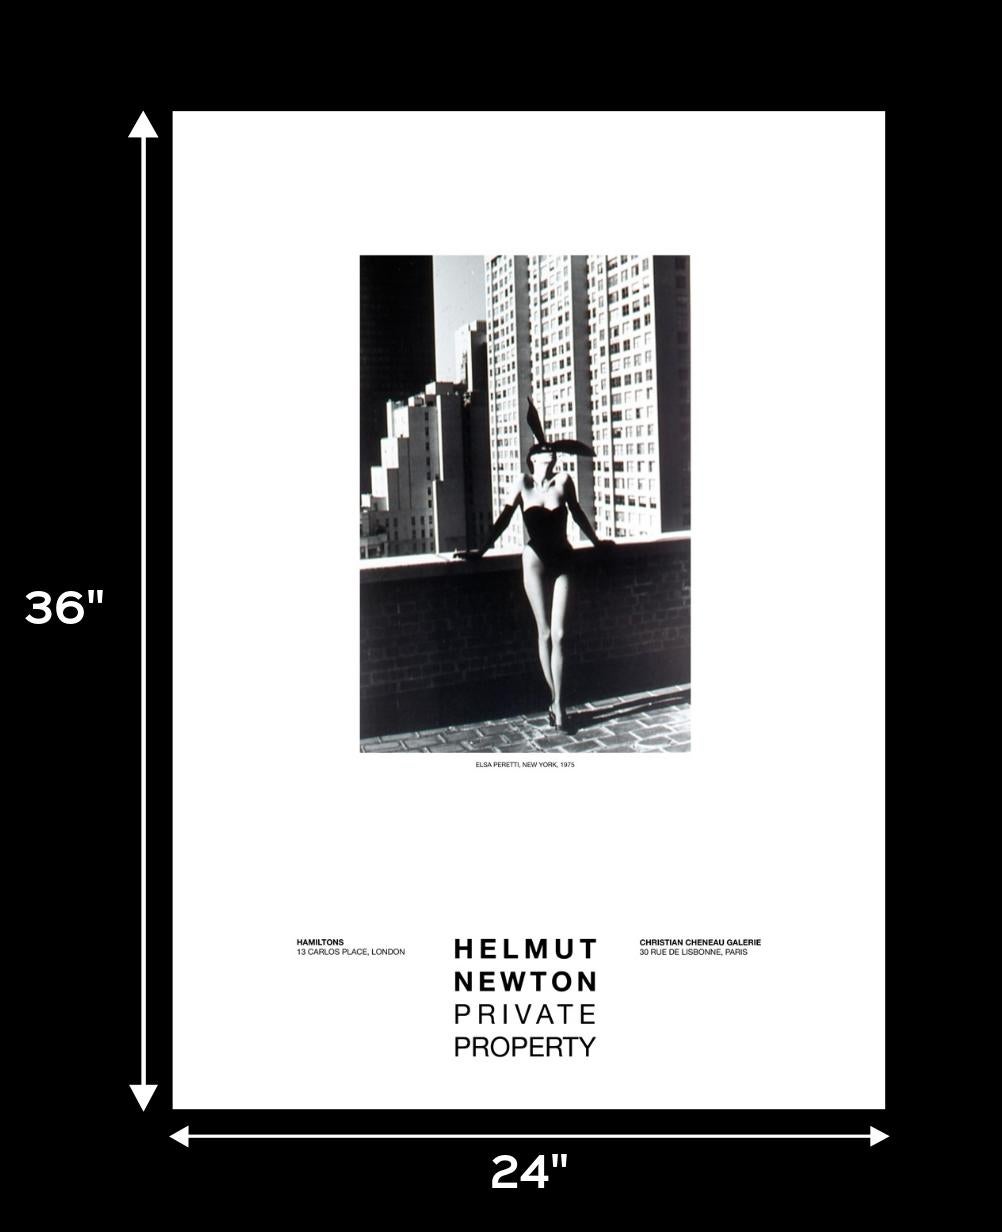 Large billboard poster featuring one of Newton's most popular images, Elsa Peretti, New York, 1975.  The image was originally shot for designer Halston featuring a bunny costume.  In 1982 Newton produced a series of three exhibitions titled 